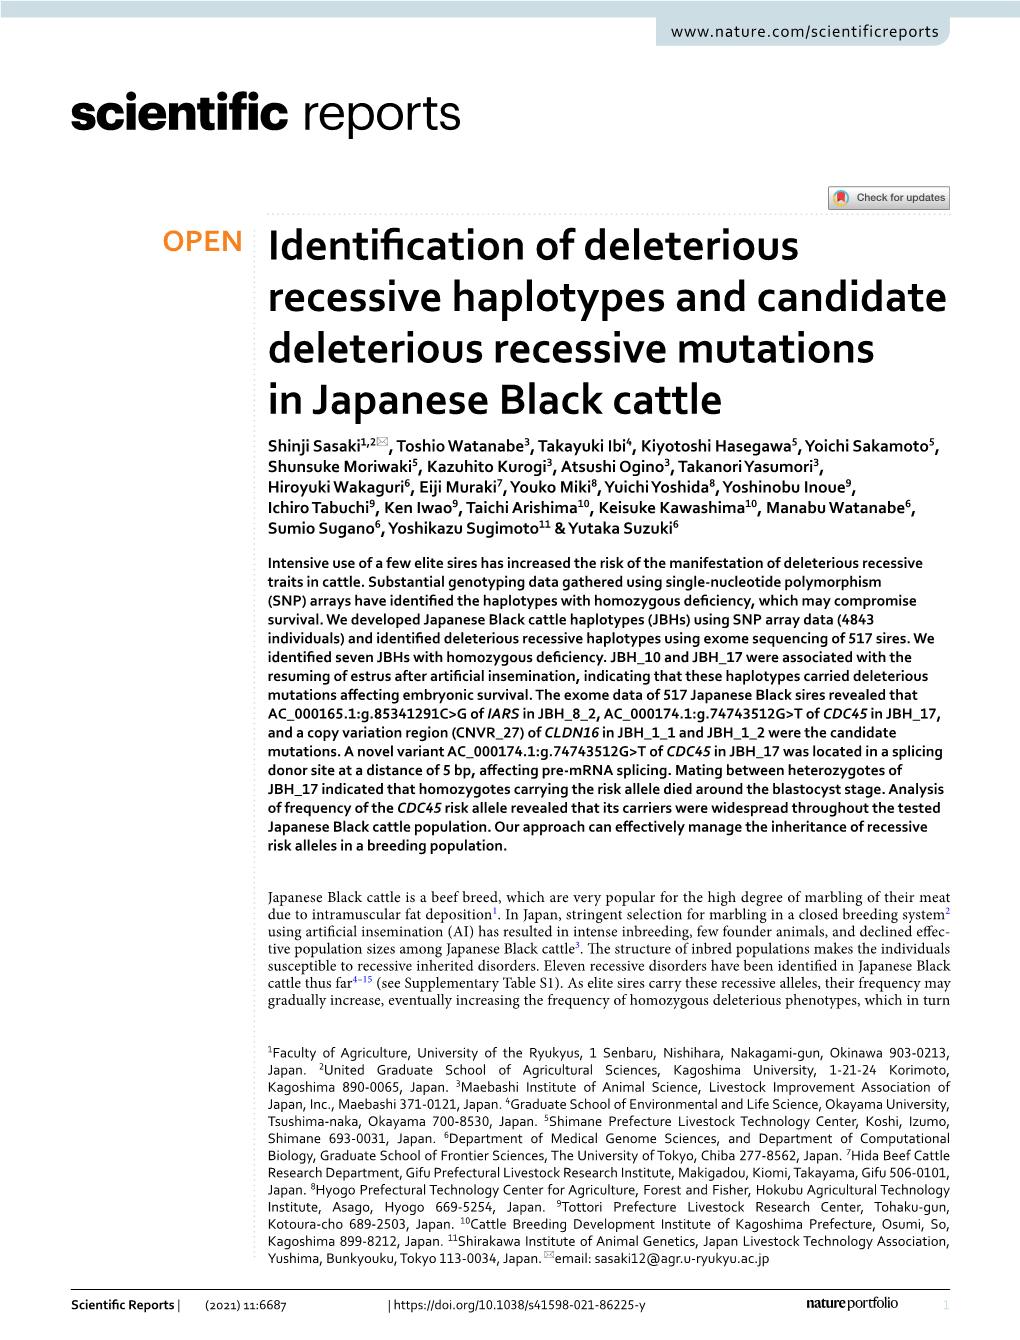 Identification of Deleterious Recessive Haplotypes and Candidate